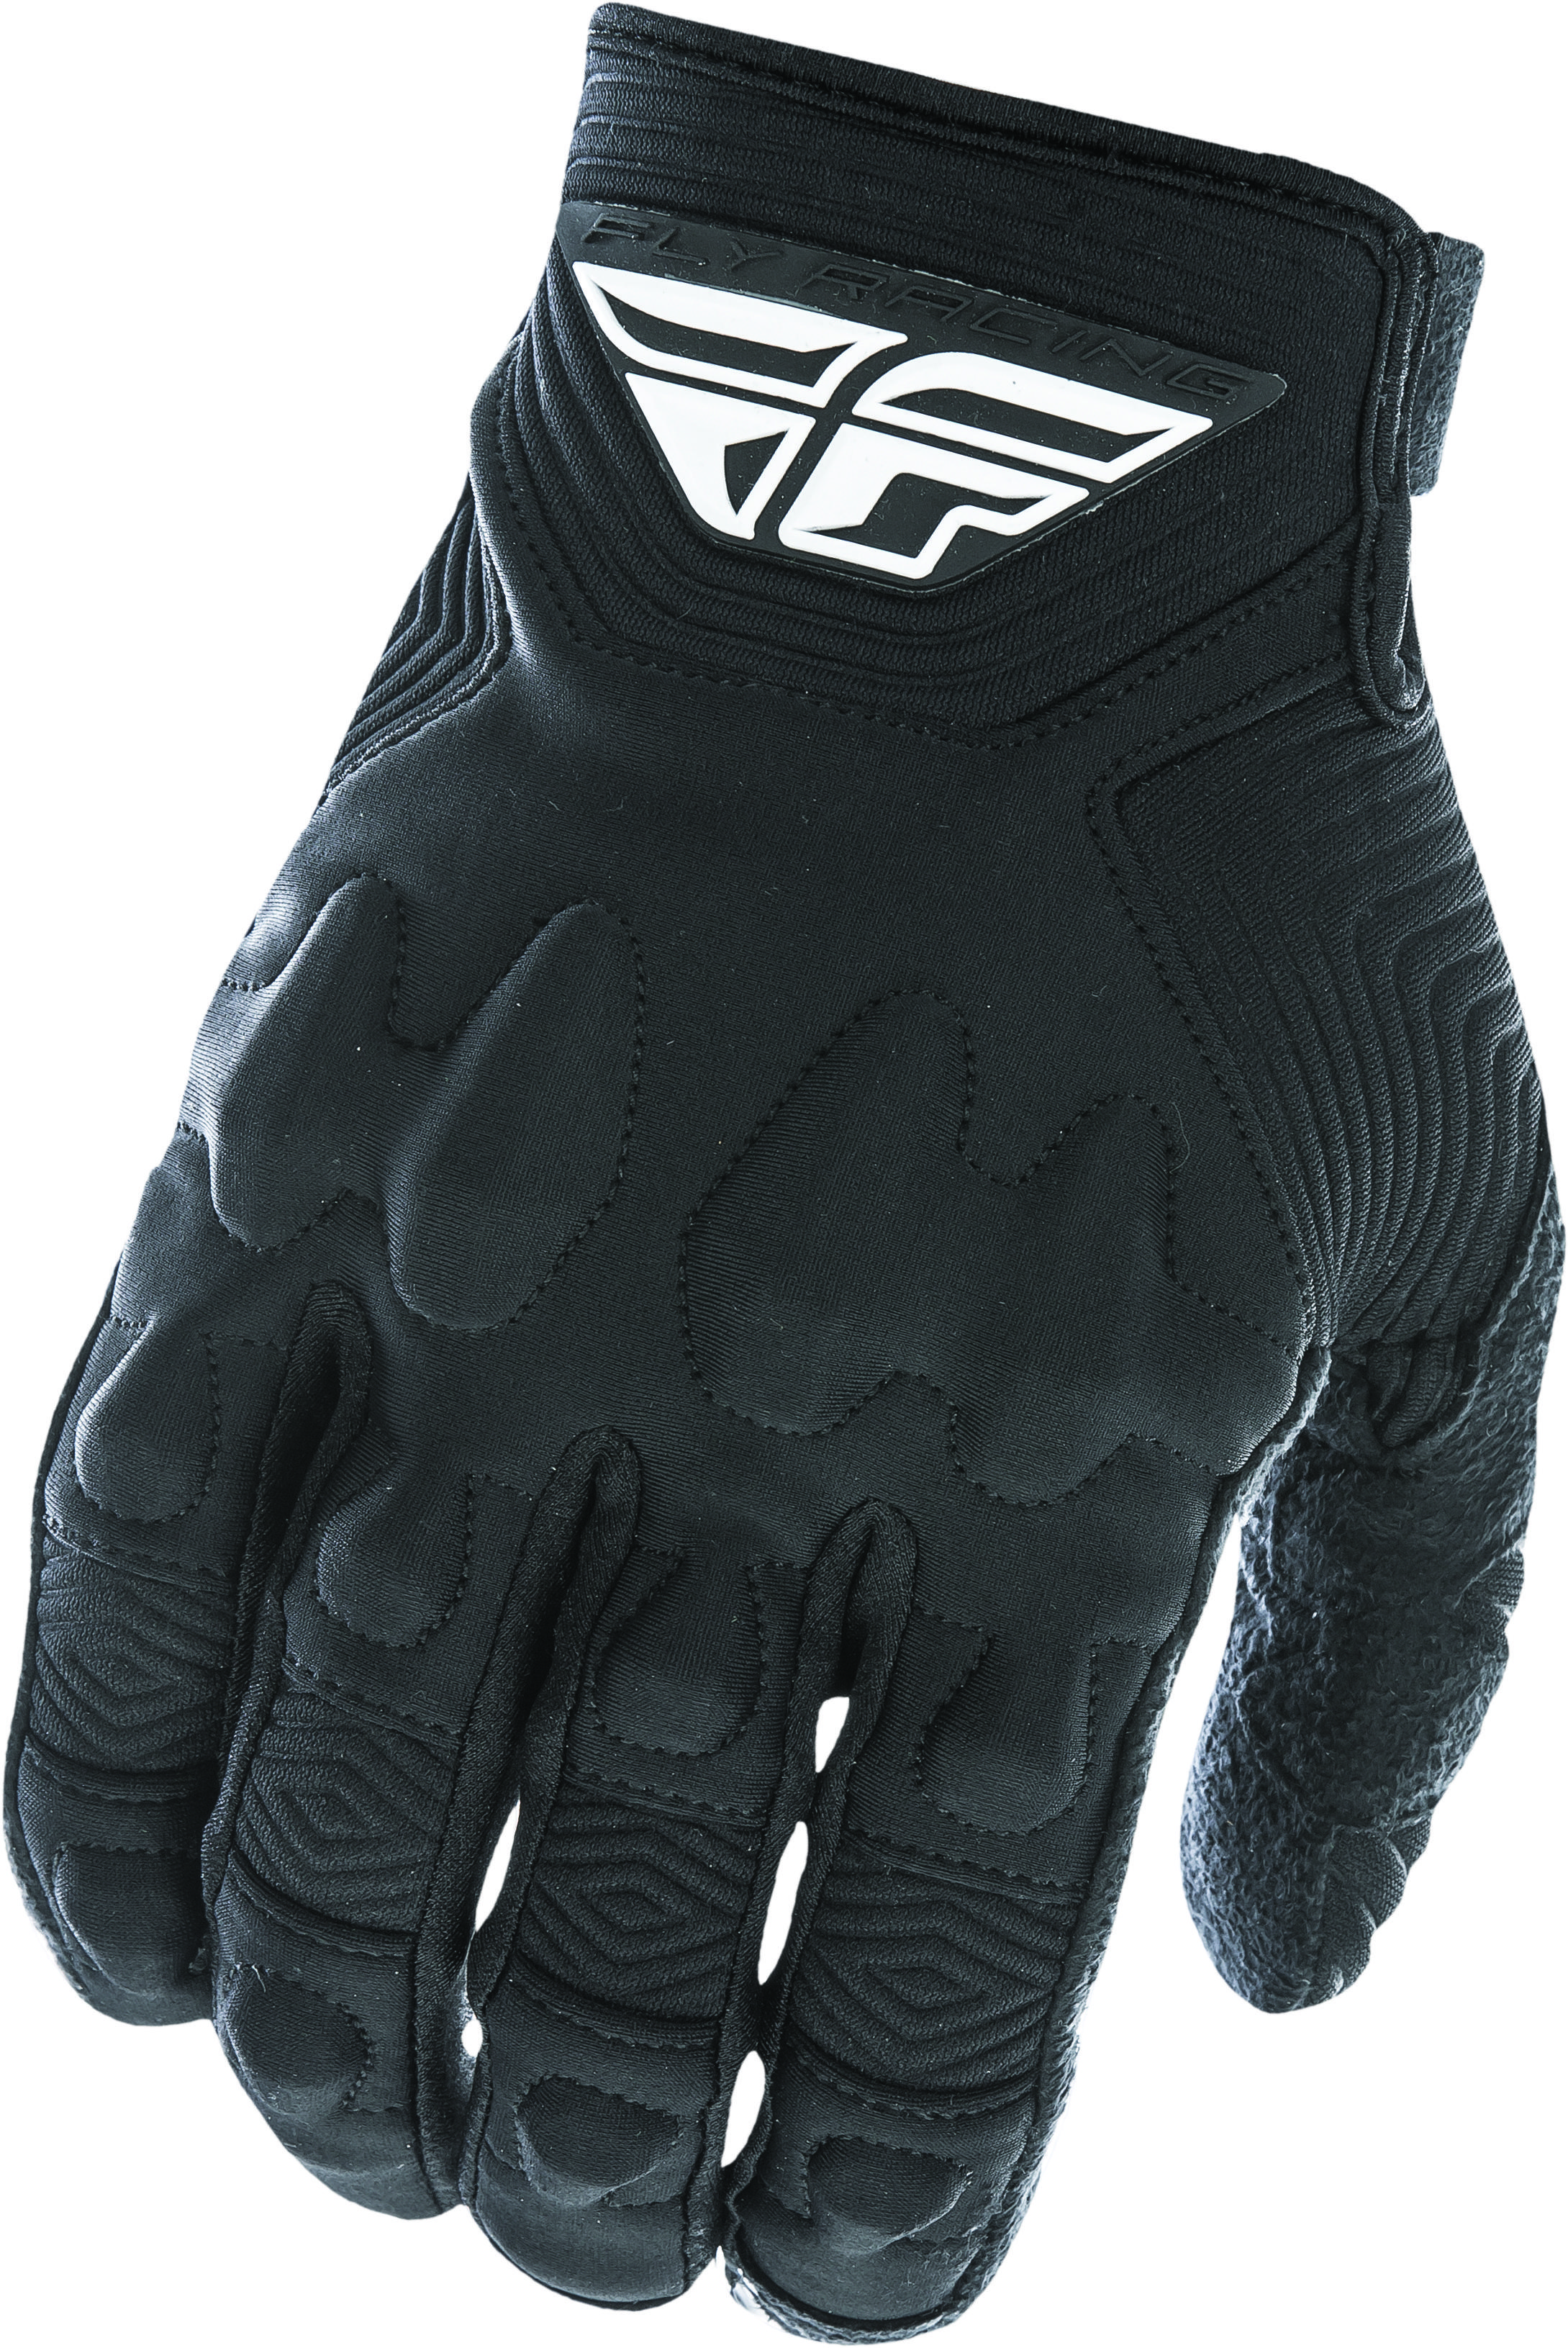 Patrol Xc Lite Riding Gloves For MX & Off-Road Black Size 12 - Click Image to Close